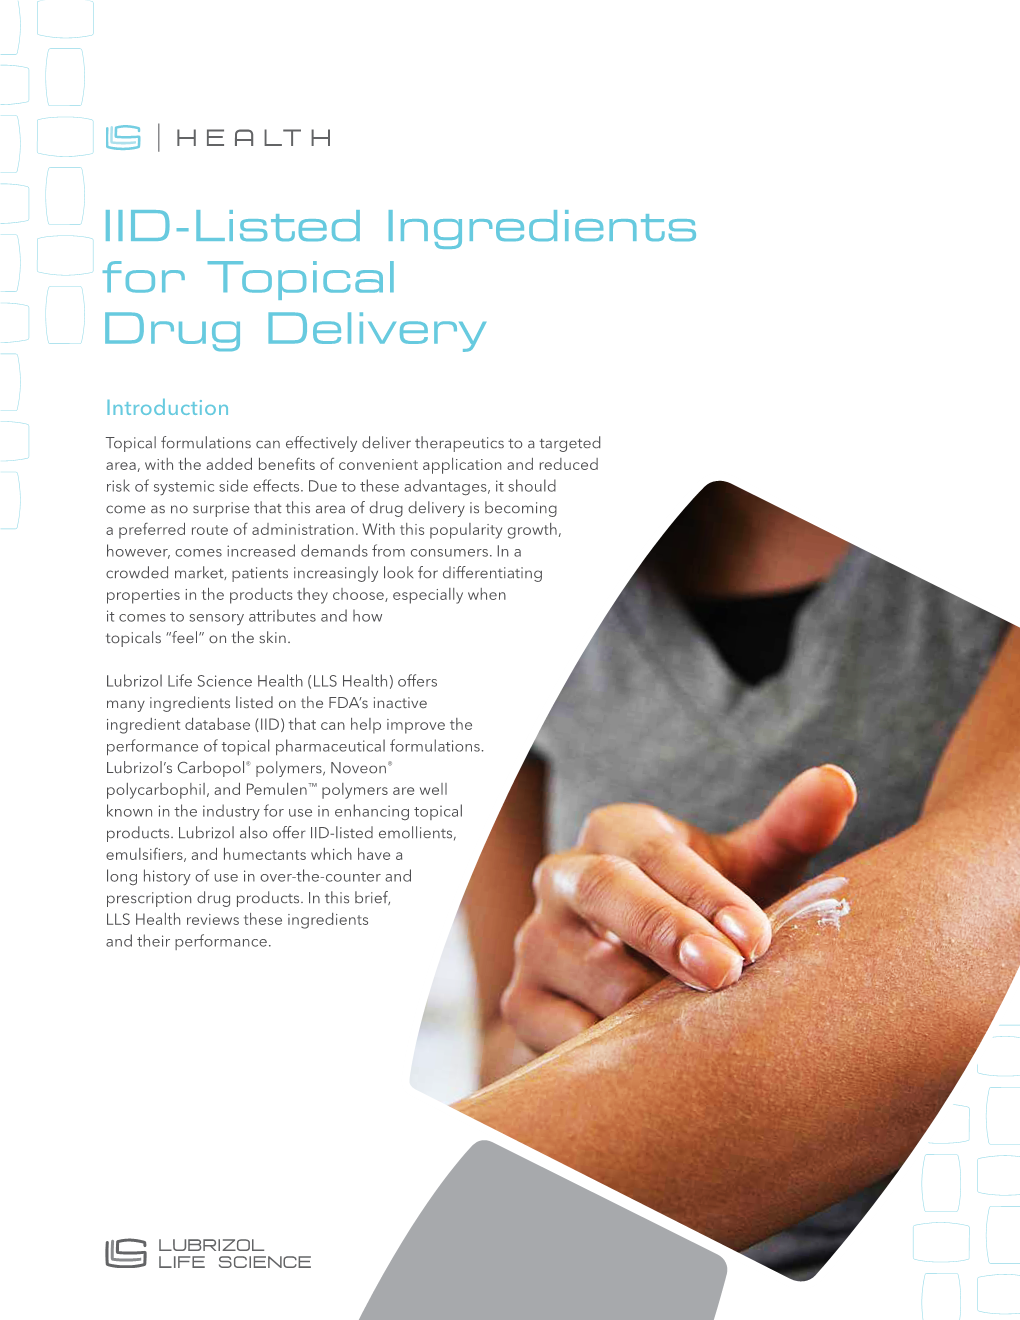 IID-Listed Ingredients for Topical Drug Delivery